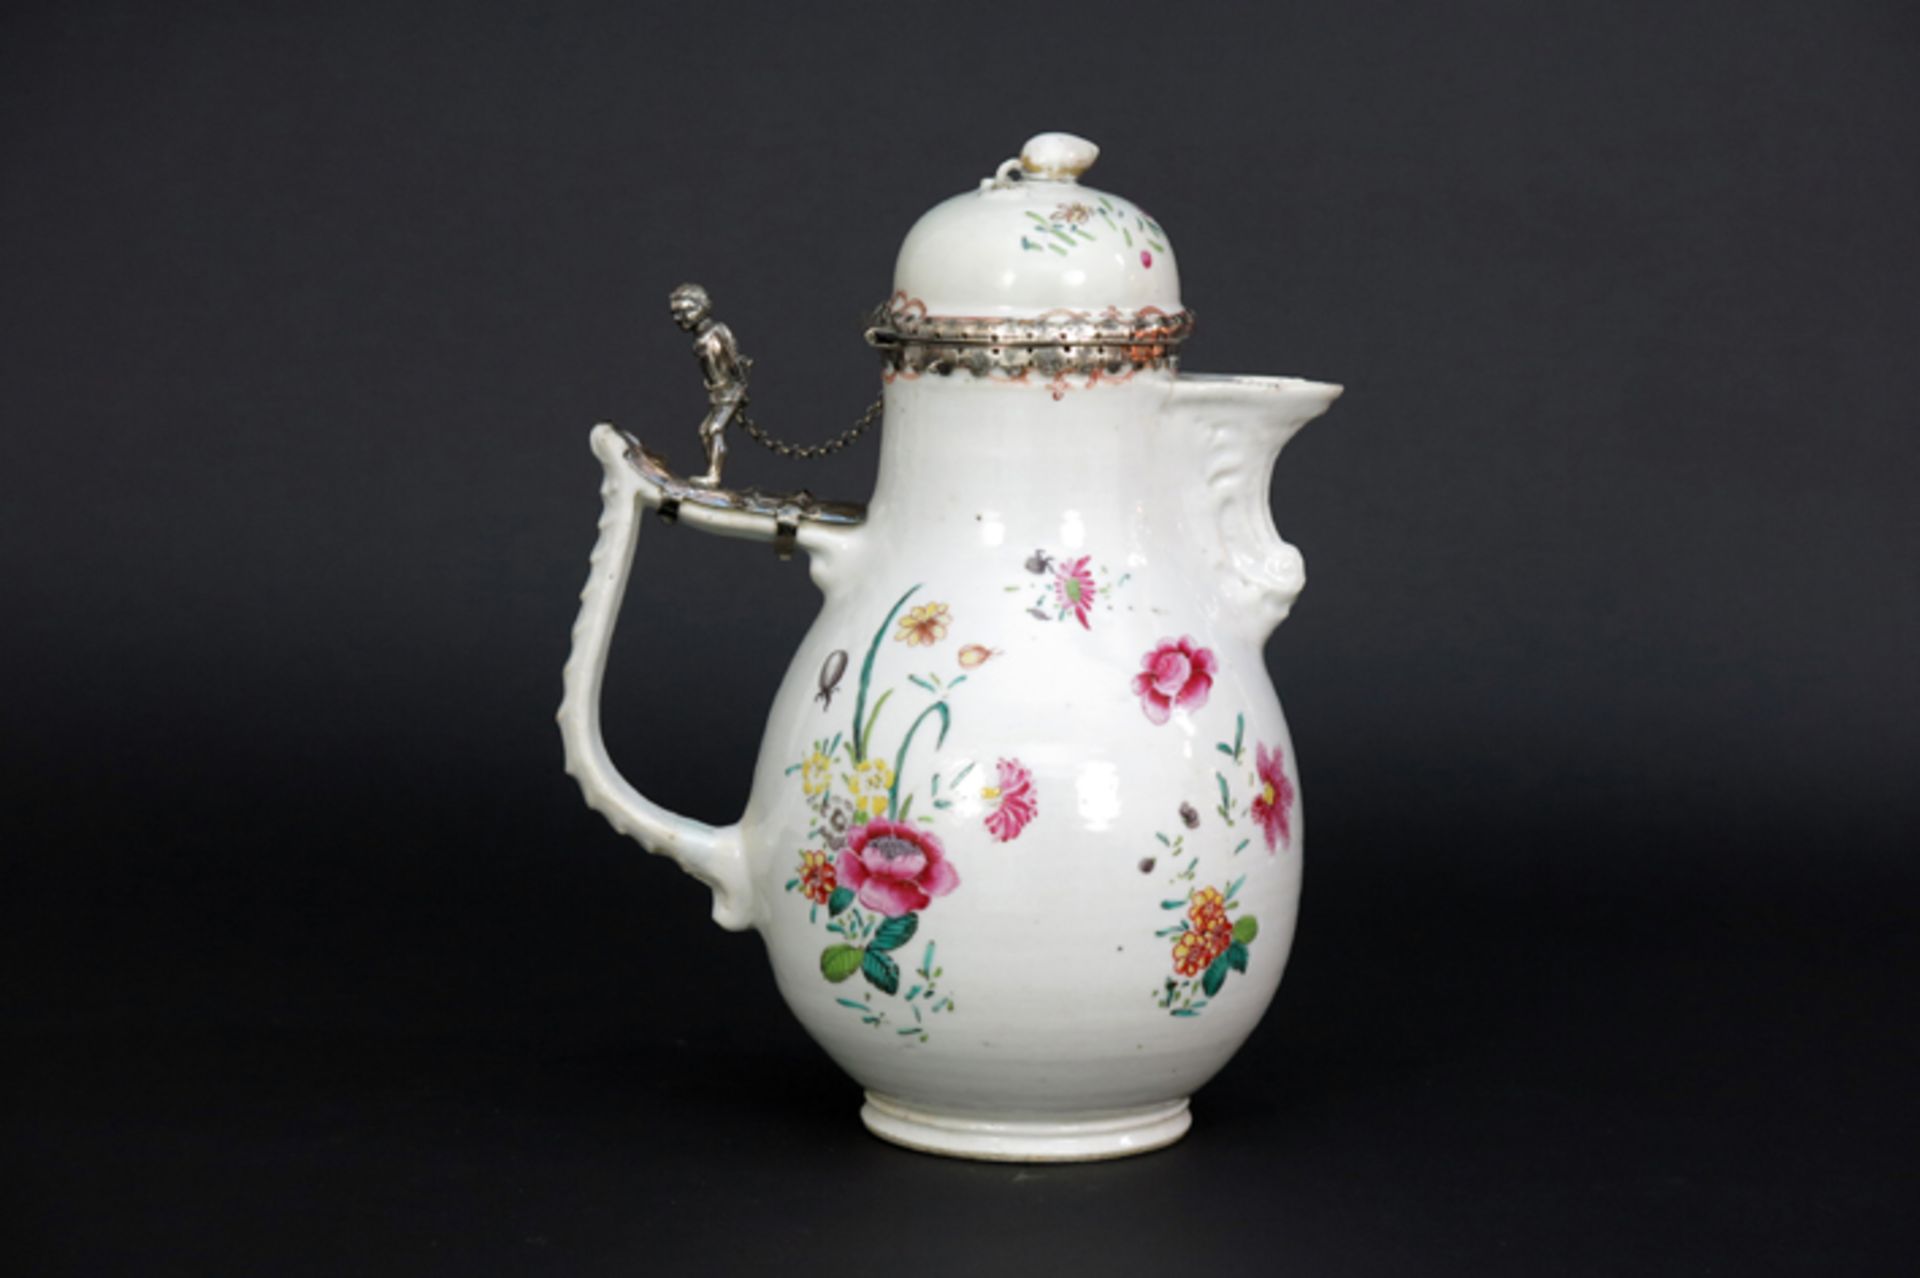 mid 18th Cent. Chinese coffeepot in porcelain with a nice decor with flowers and [...] - Image 2 of 6